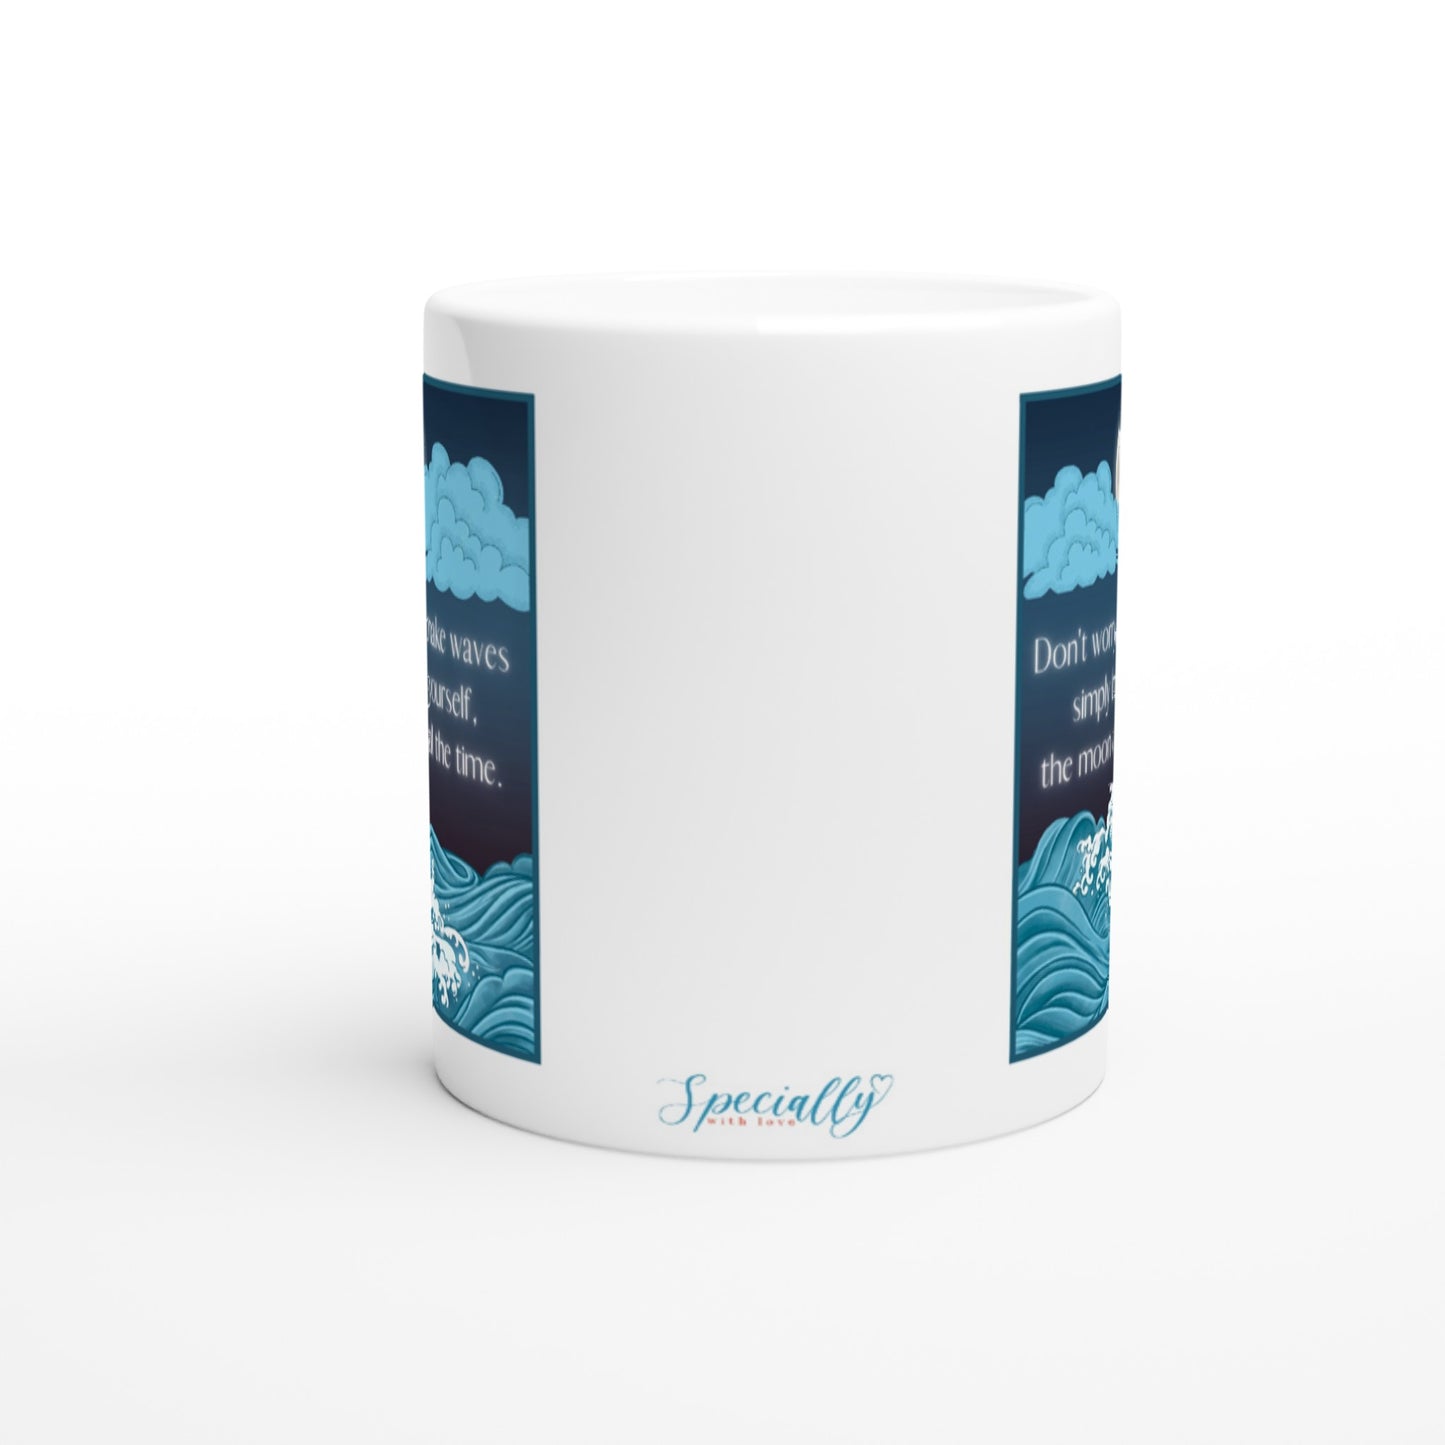 "Don't worry about making waves" 11 oz. Mug side view